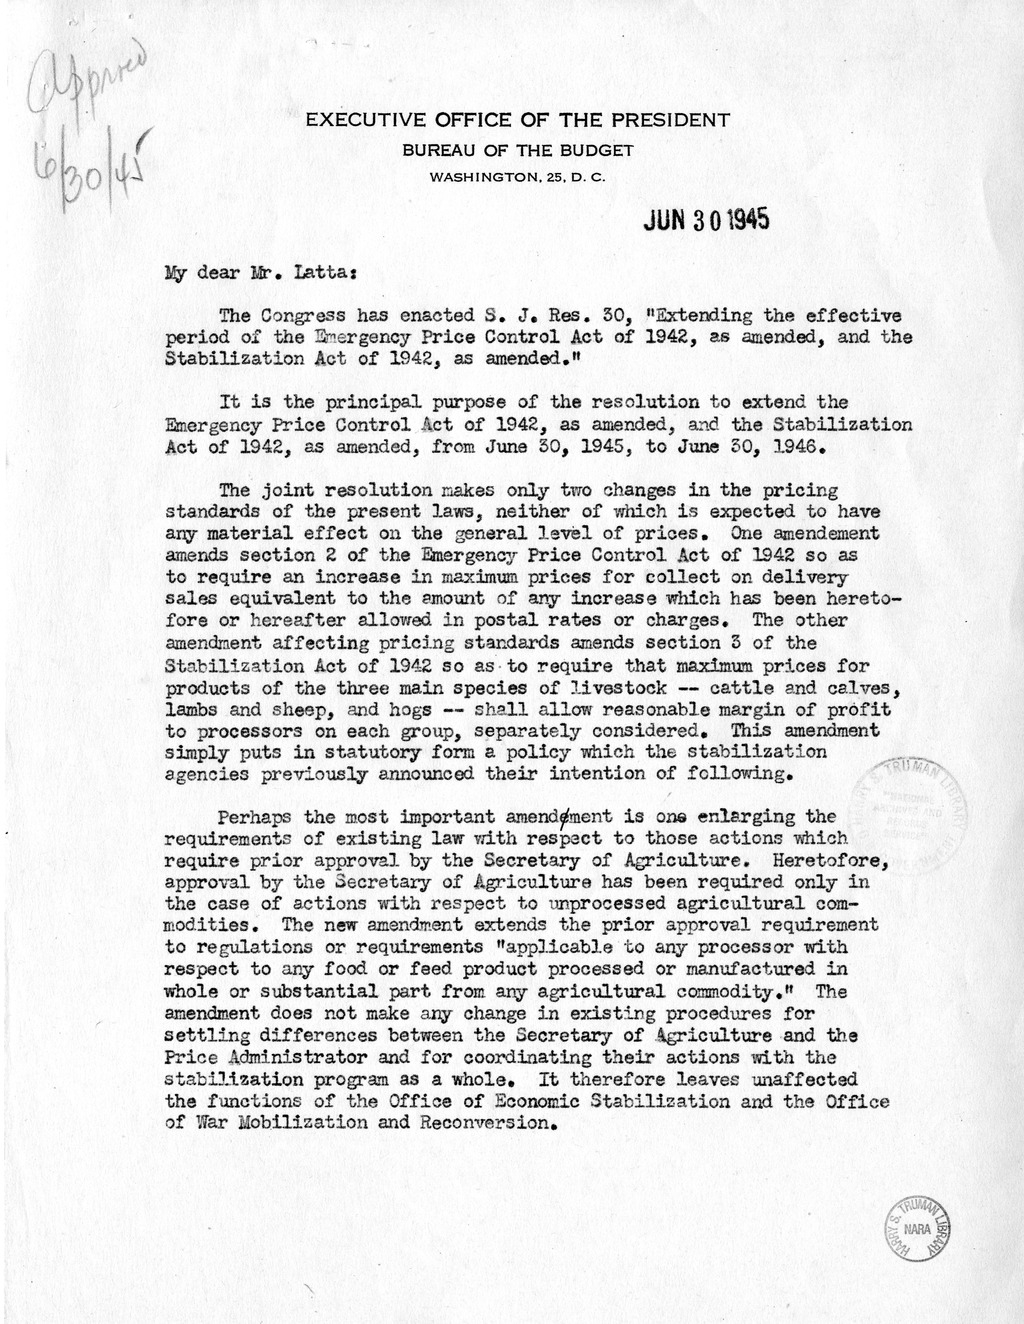 Memorandum from Frederick J. Lawton to M. C. Latta, S.J. Res. 30, Extending the Effective Period of the Emergency Price Control Act of 1942 and the Stabilization Act of 1942, with Attachments